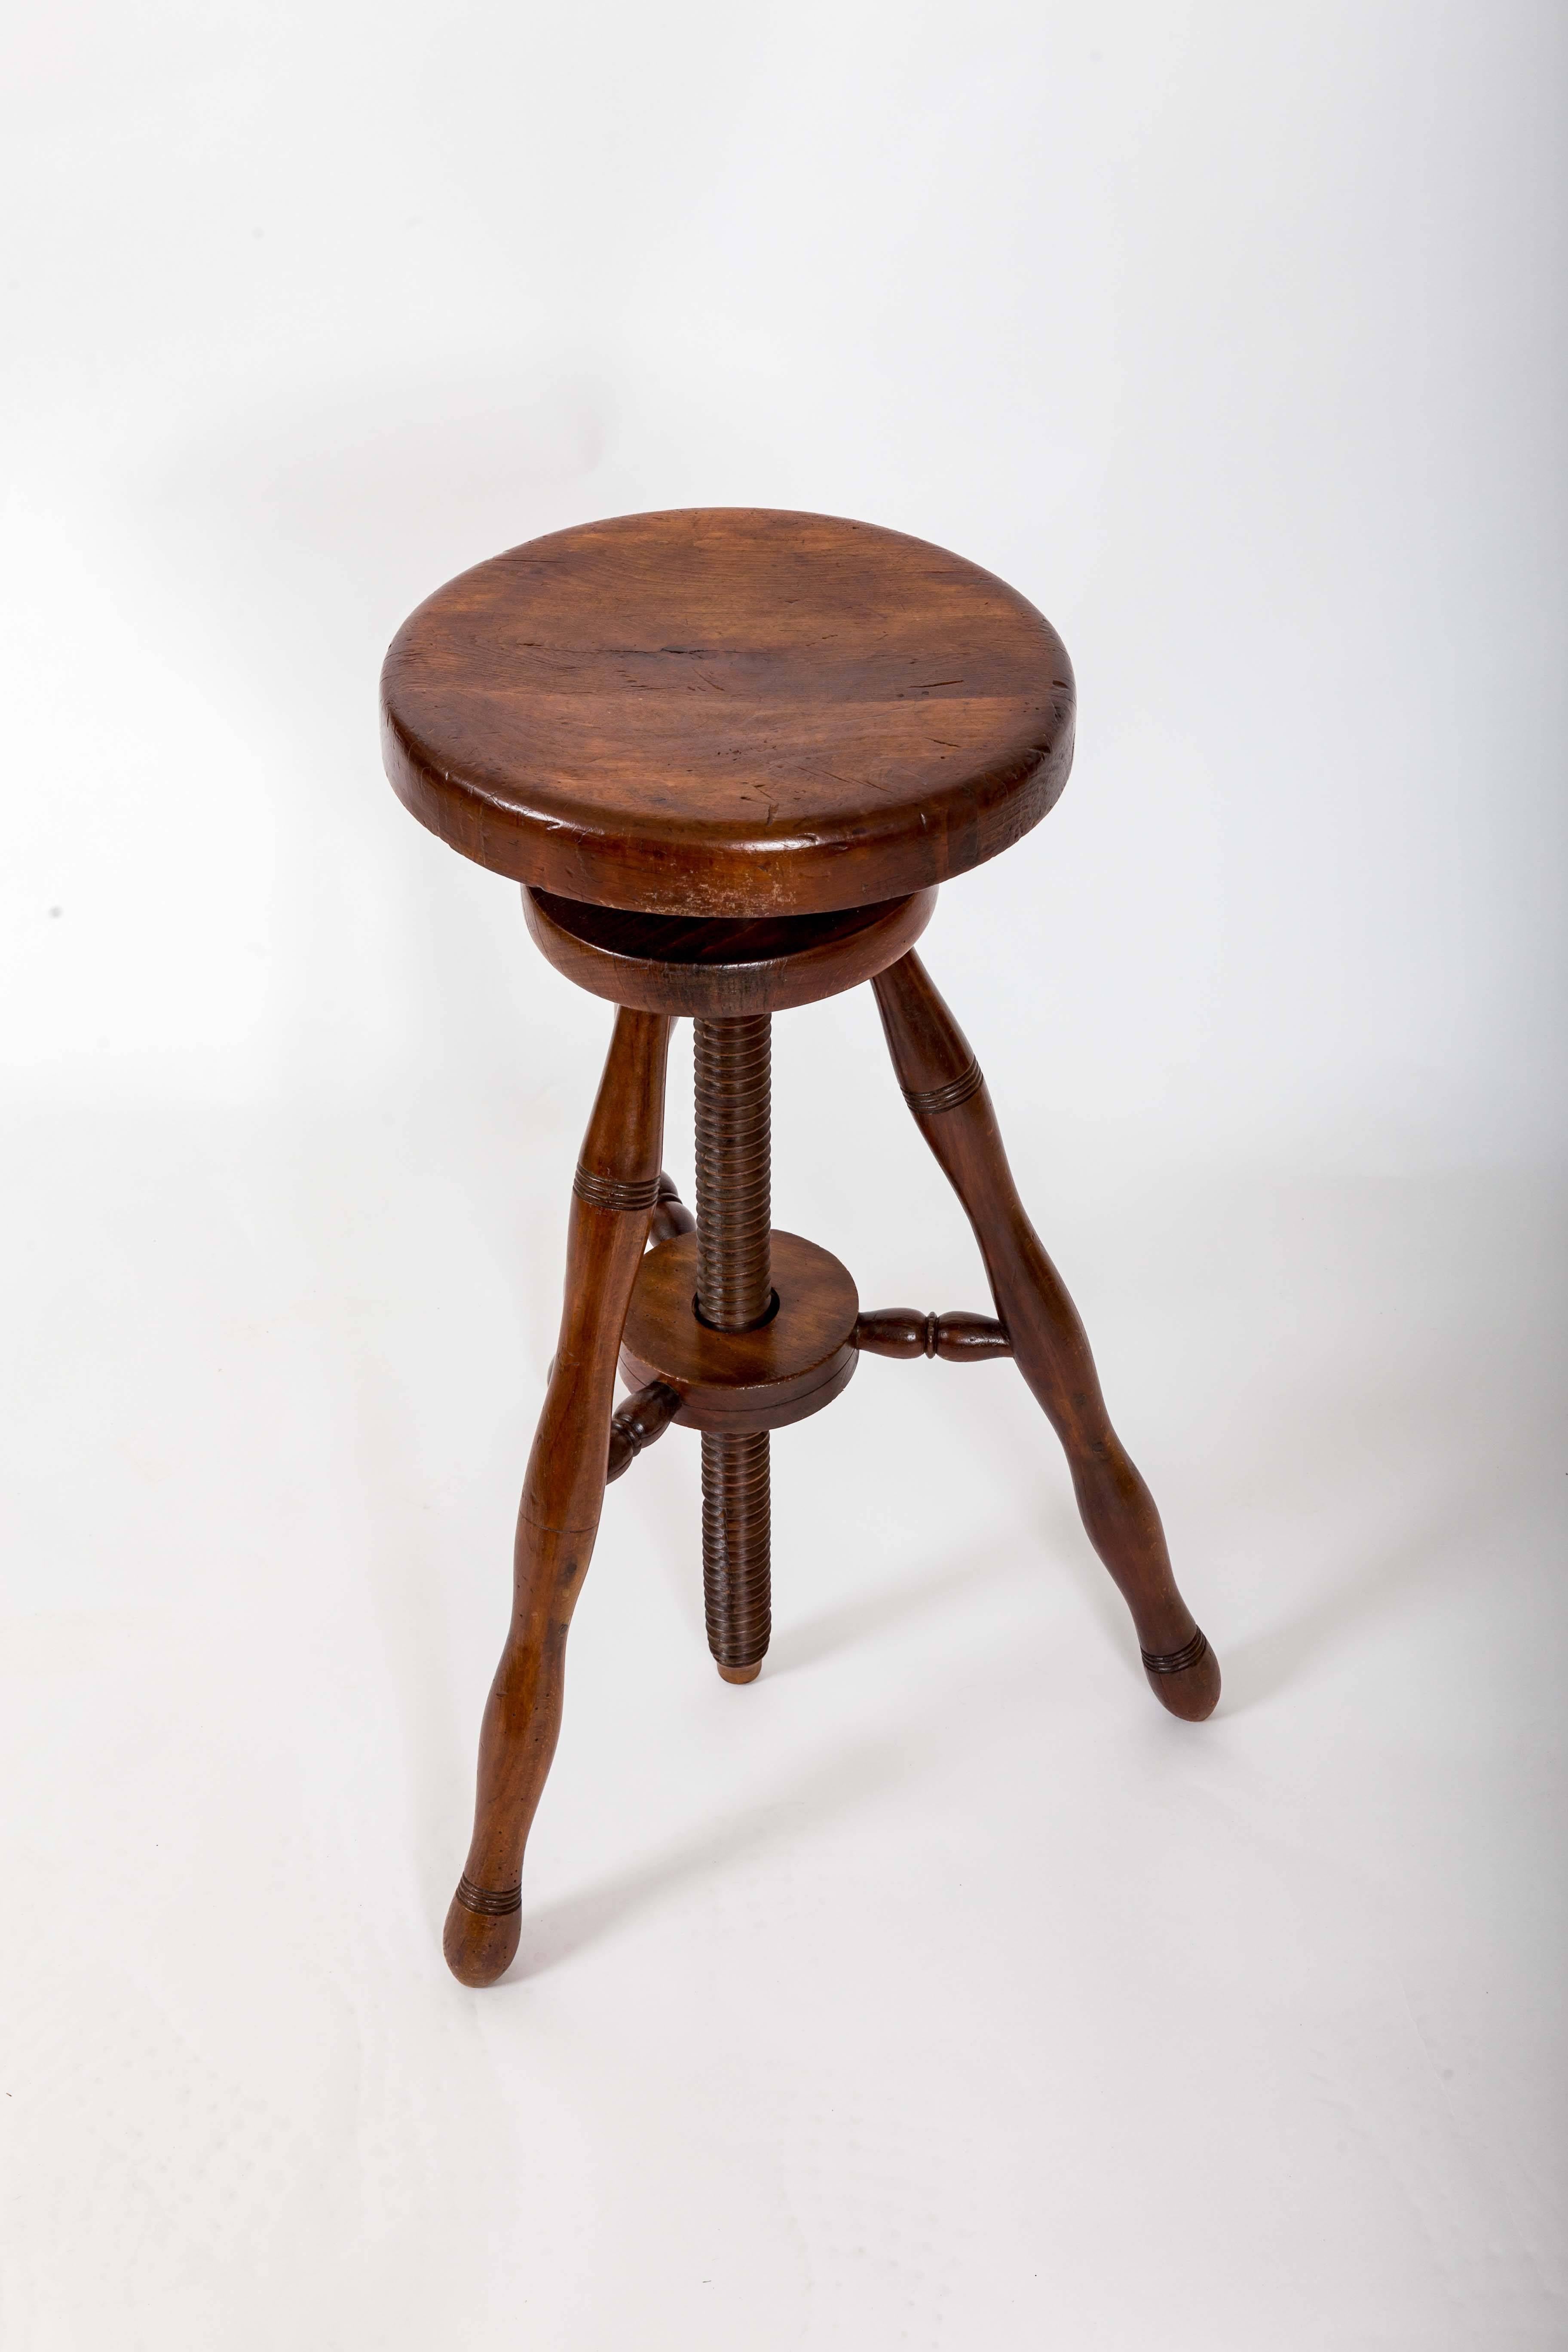 Beechwood stool with rotating swivel seat that can reach a height of 38